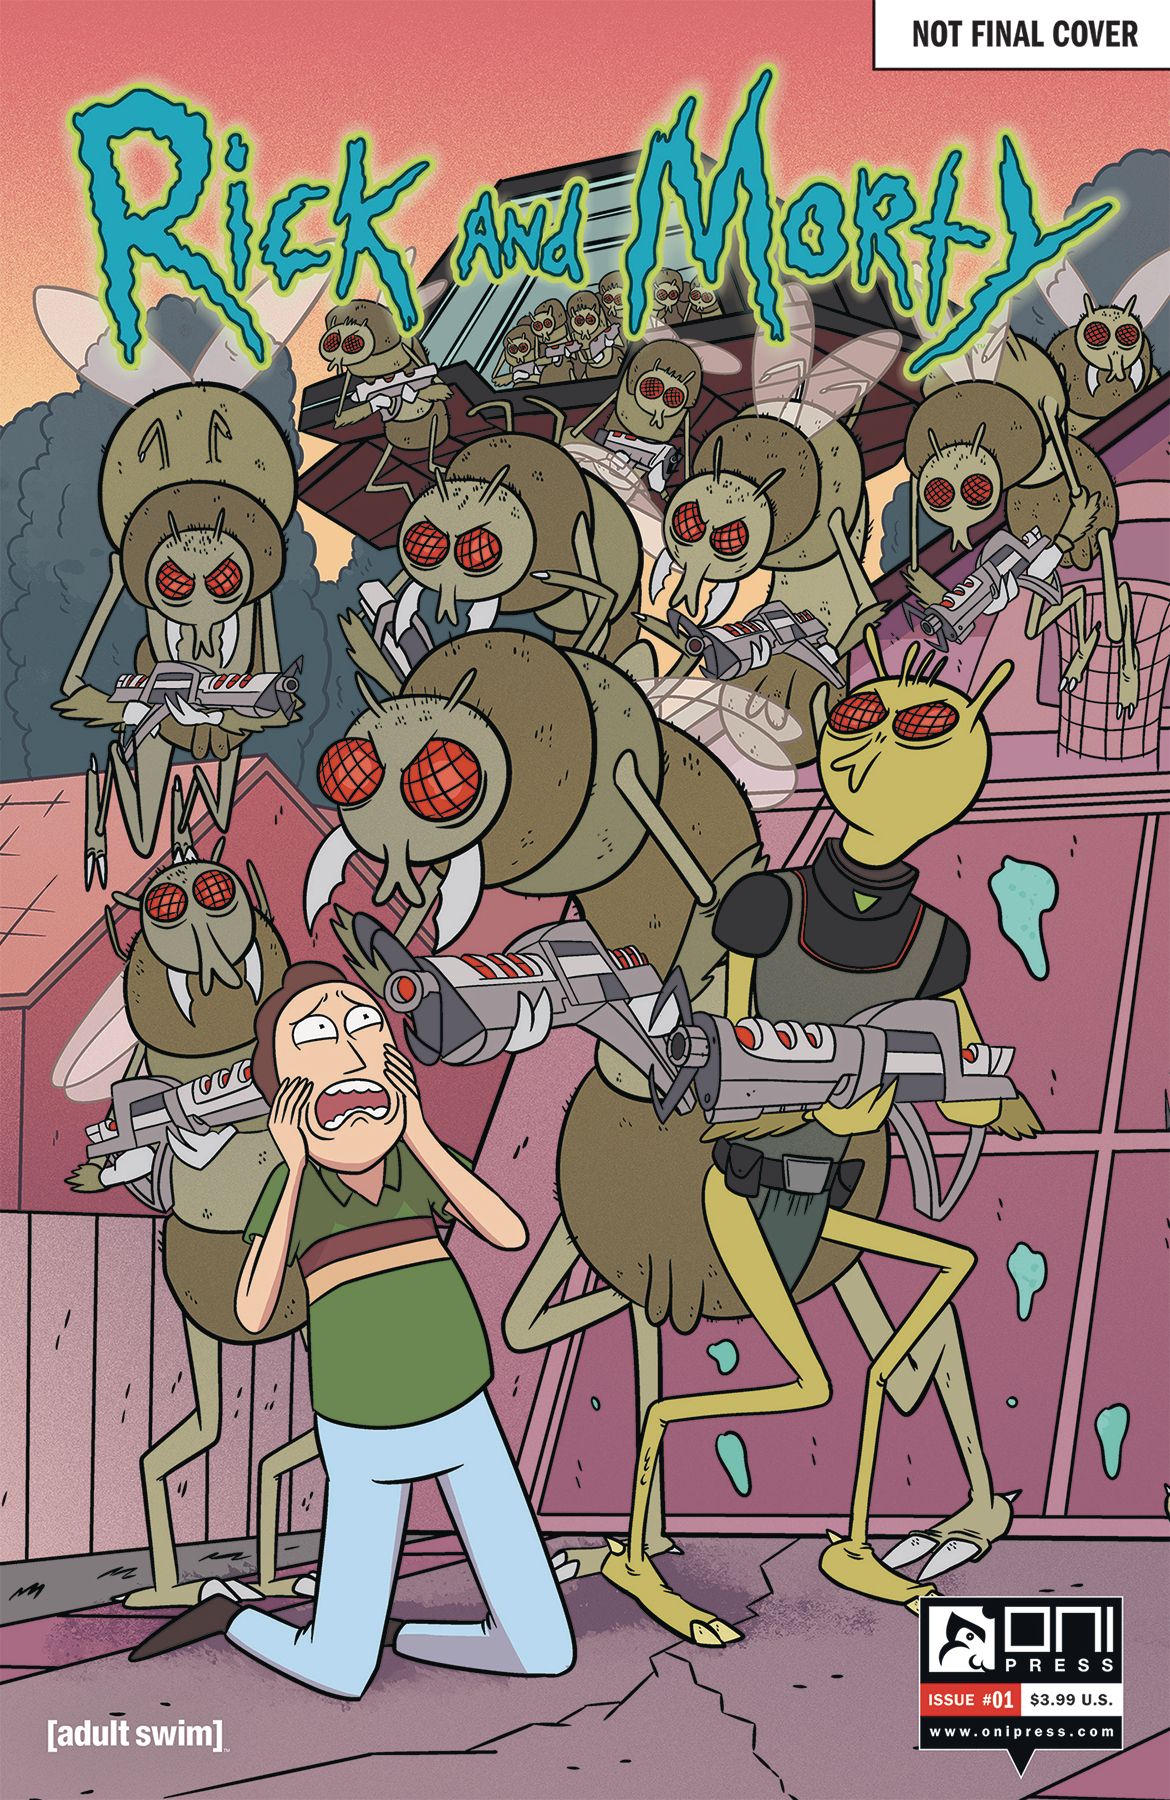 Rick and Morty: 50th Issue Celebration  #1 Comic